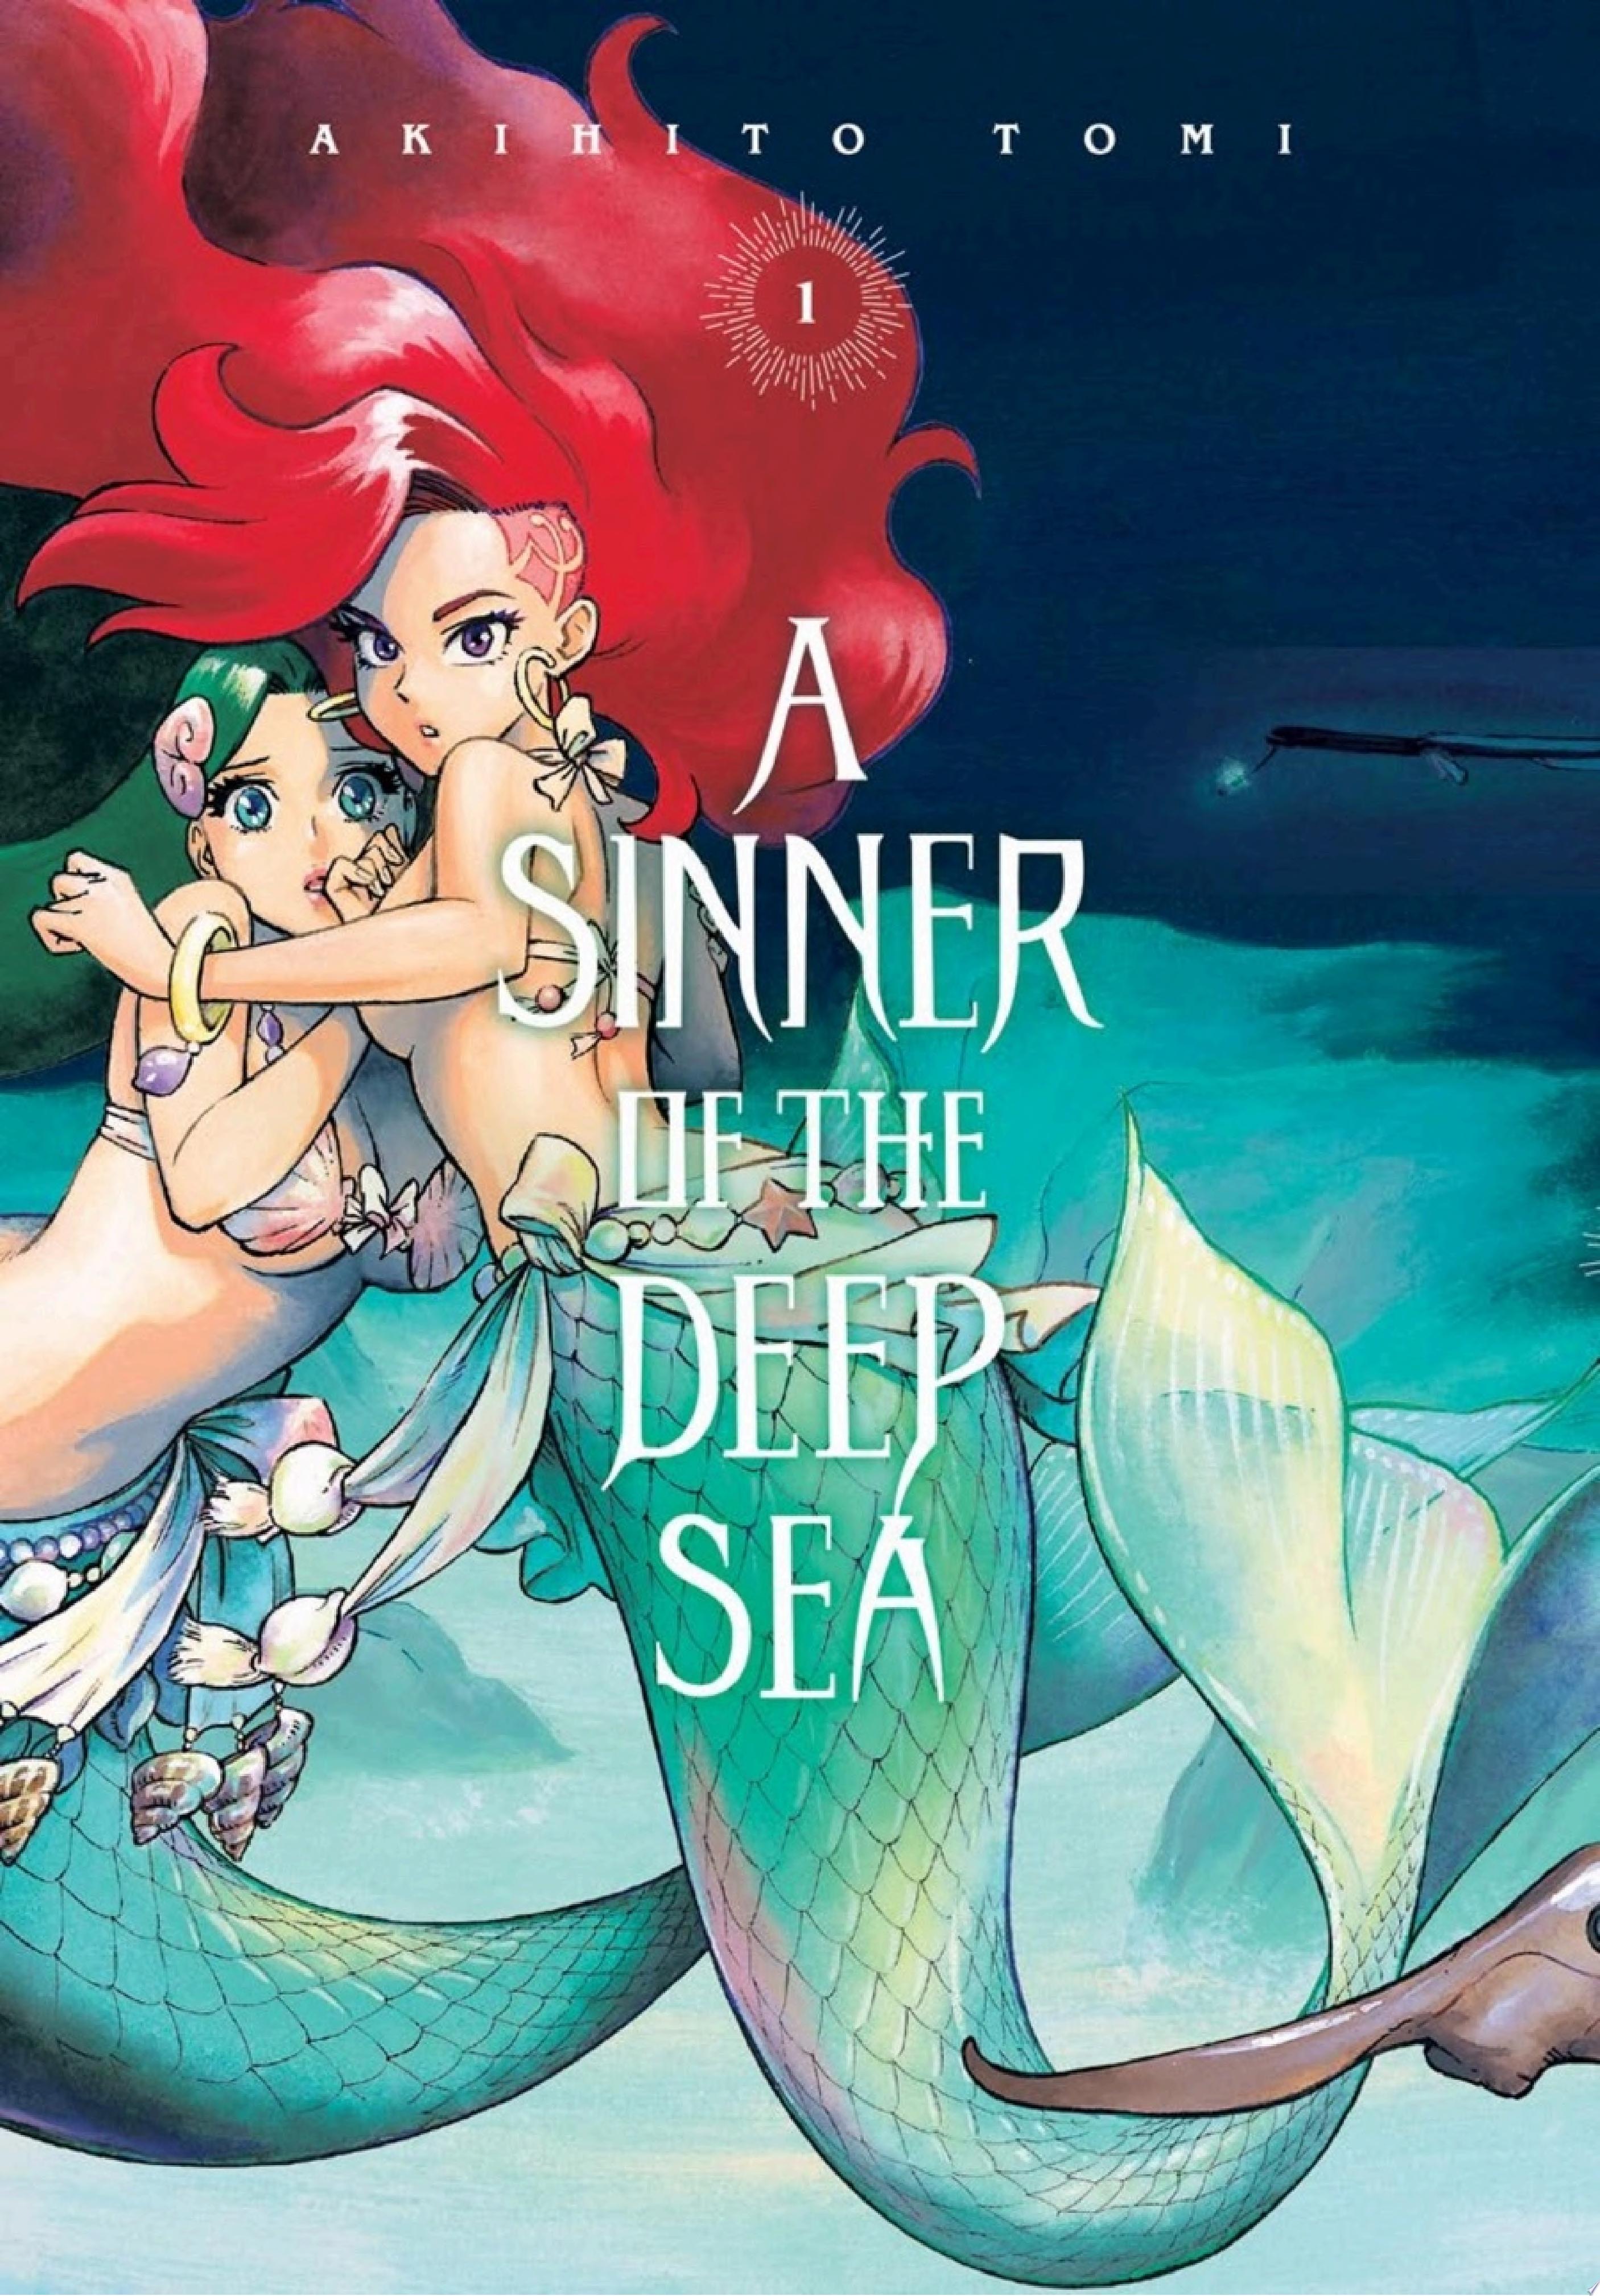 Image for "A Sinner of the Deep Sea, Vol. 1"